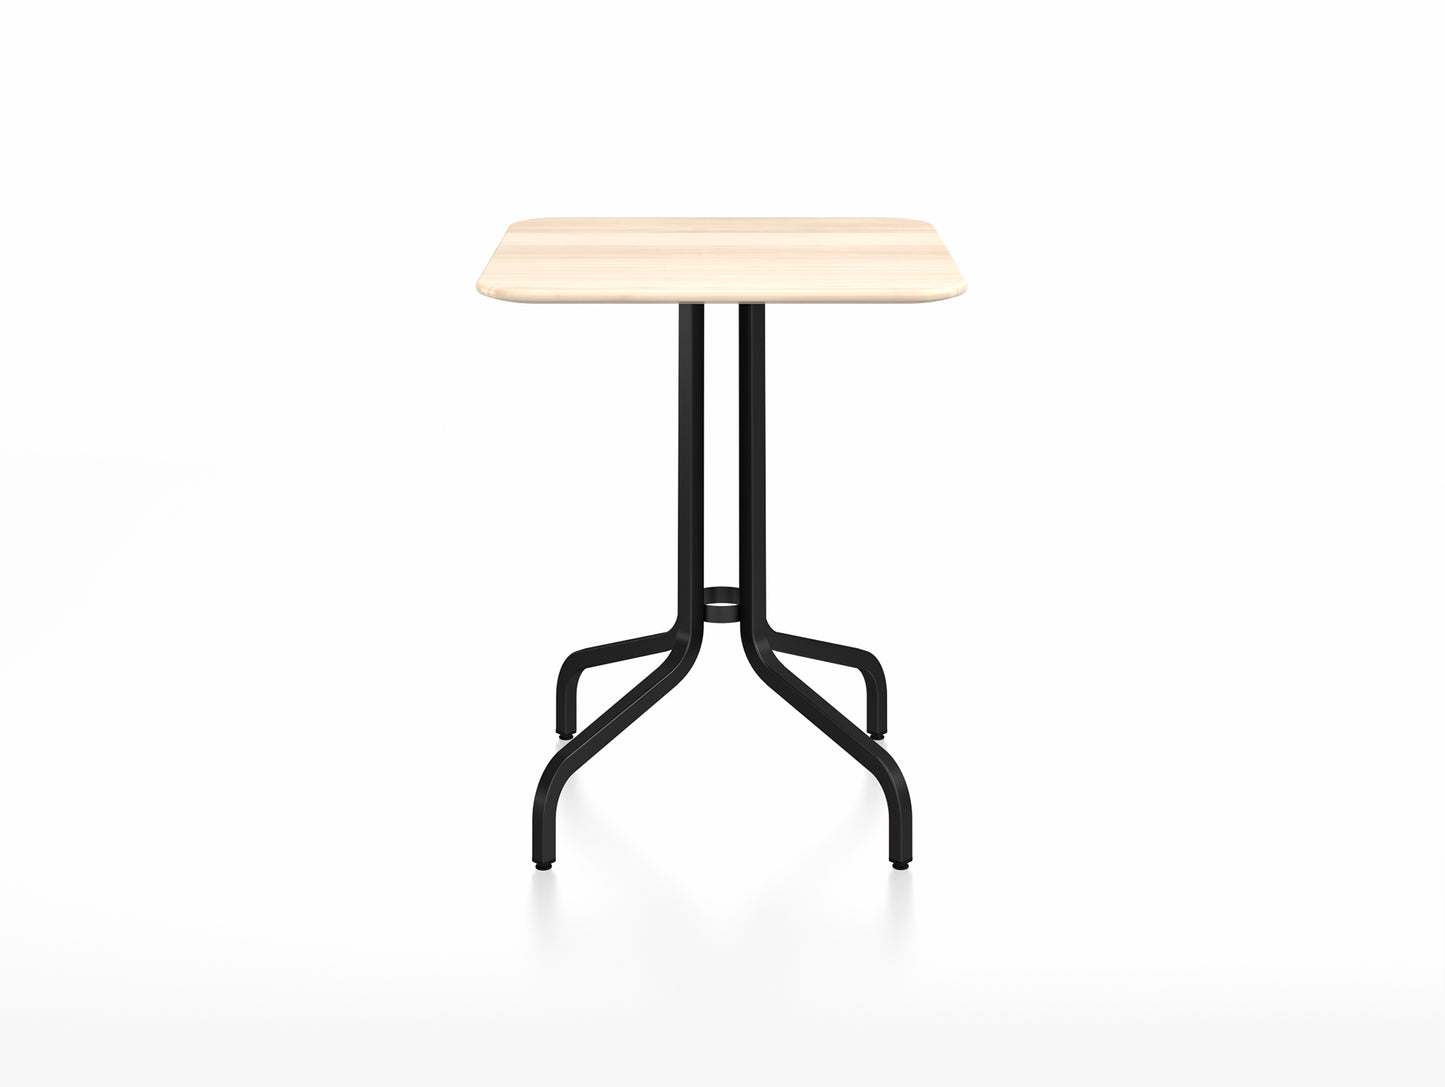 1 Inch Outdoor Cafe Table by Emeco - Square (60 x 60 cm) / Black Powder Coated Aluminium Base / Accoya Wood Tabletop